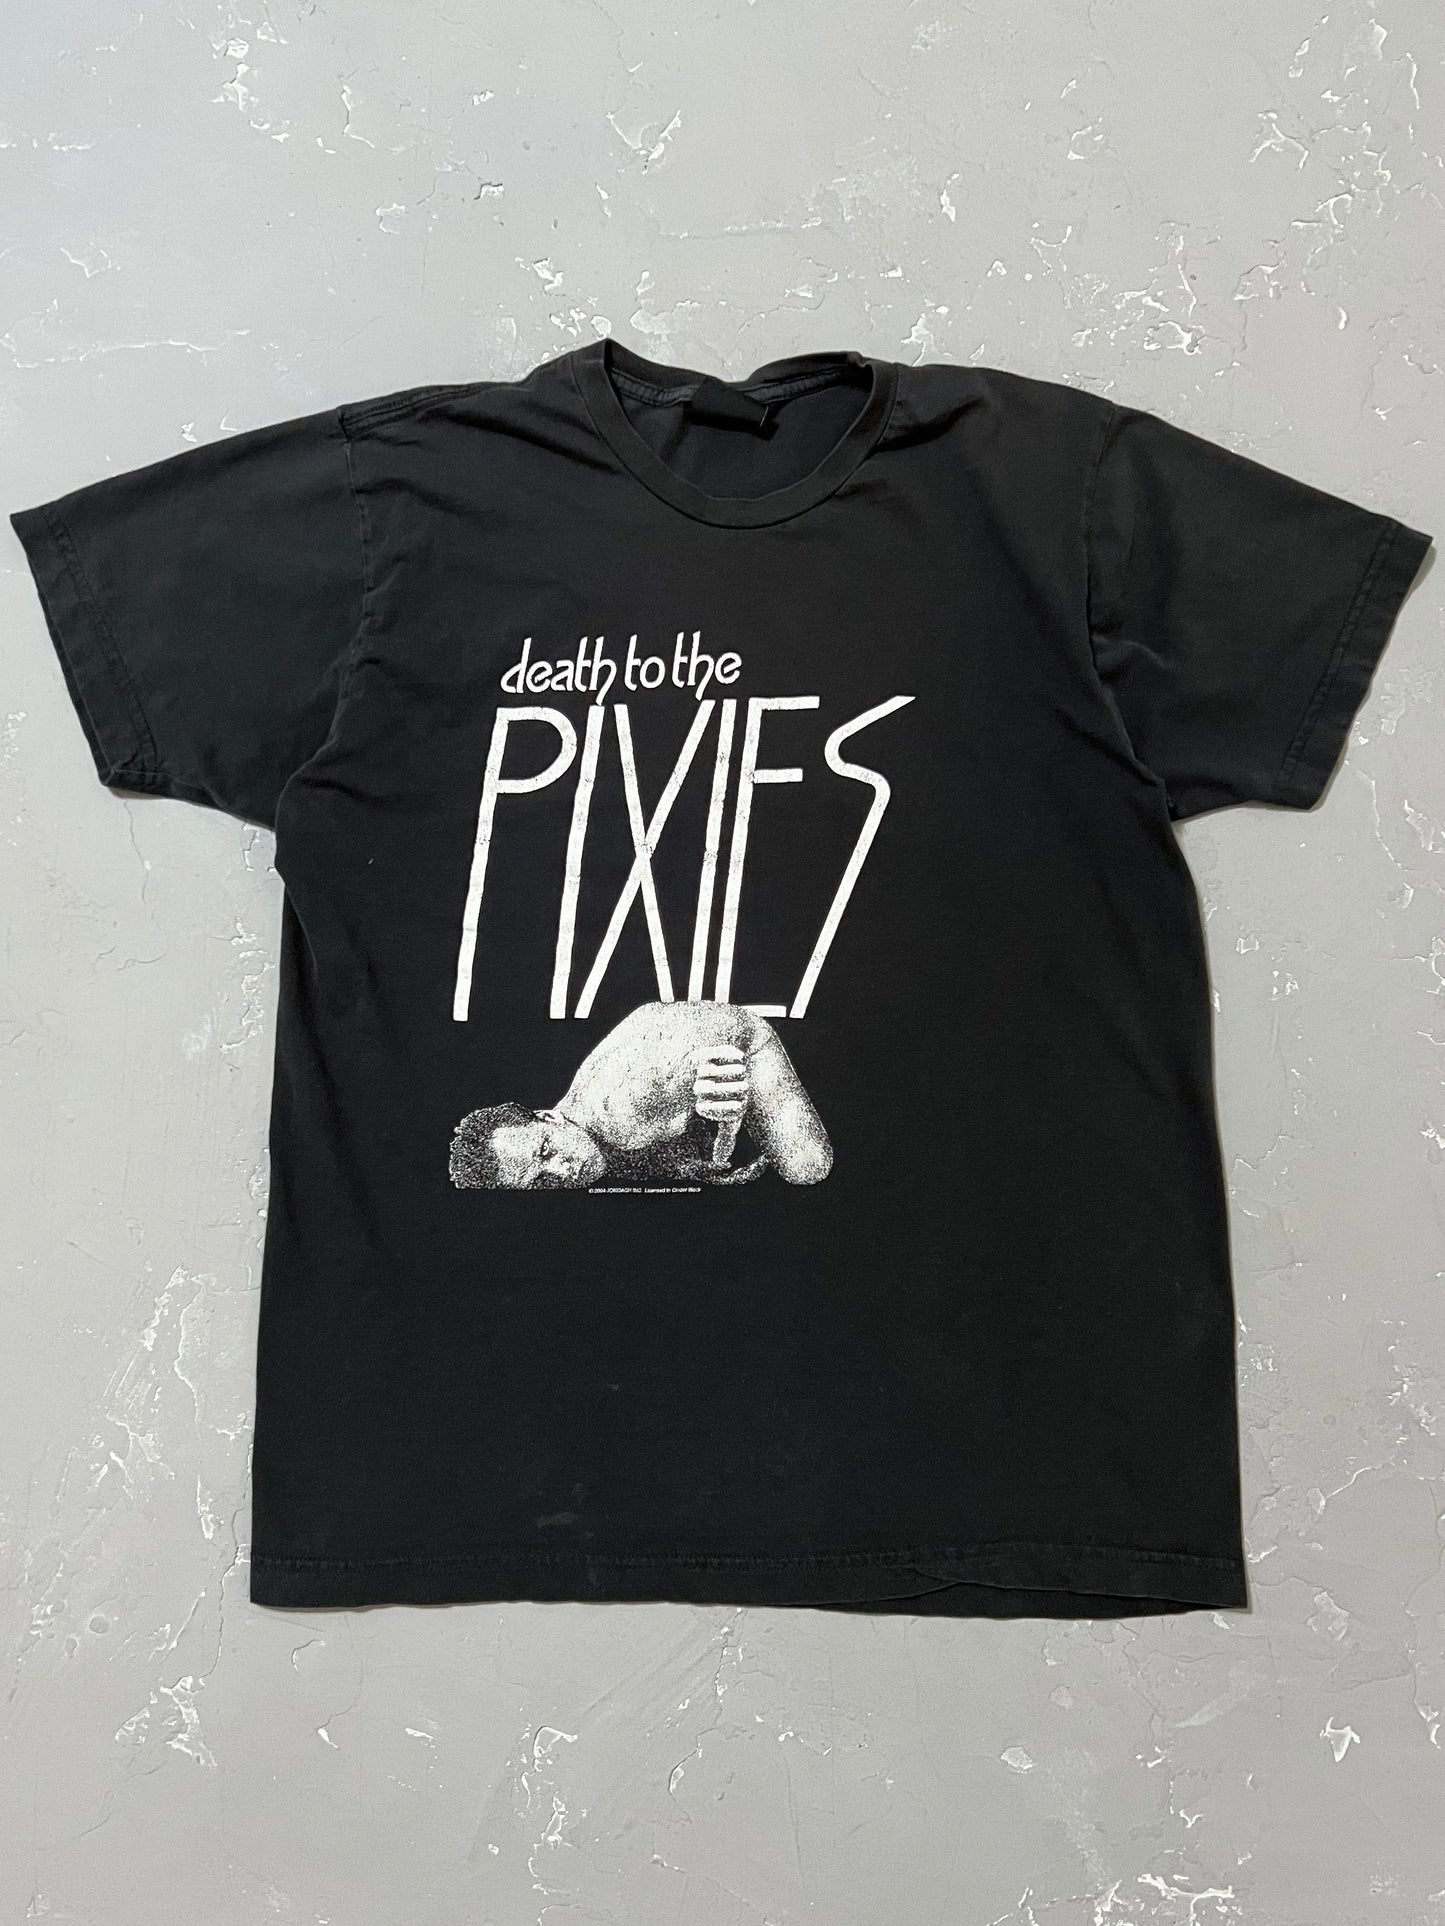 2004 “Death to the Pixies” Tee [M]